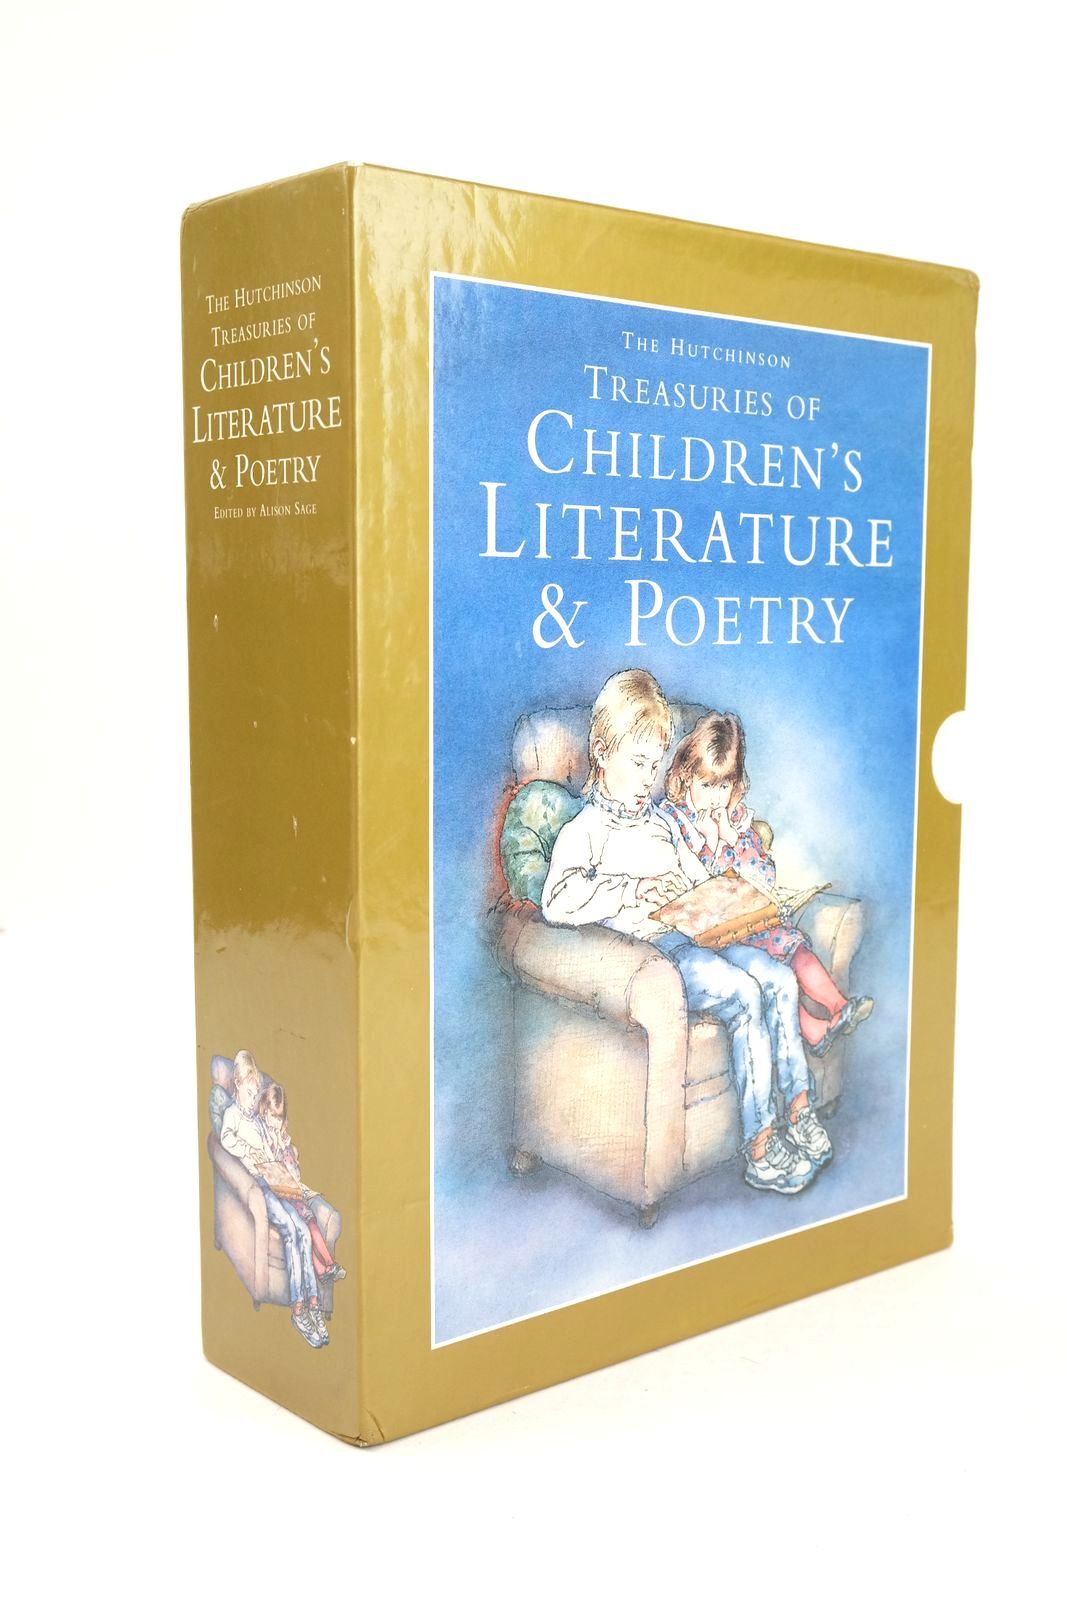 Photo of THE HUTCHINSON TREASURIES OF CHILDREN'S LITERATURE &amp; POETRY published by Hutchinson Children's Books (STOCK CODE: 1325405)  for sale by Stella & Rose's Books